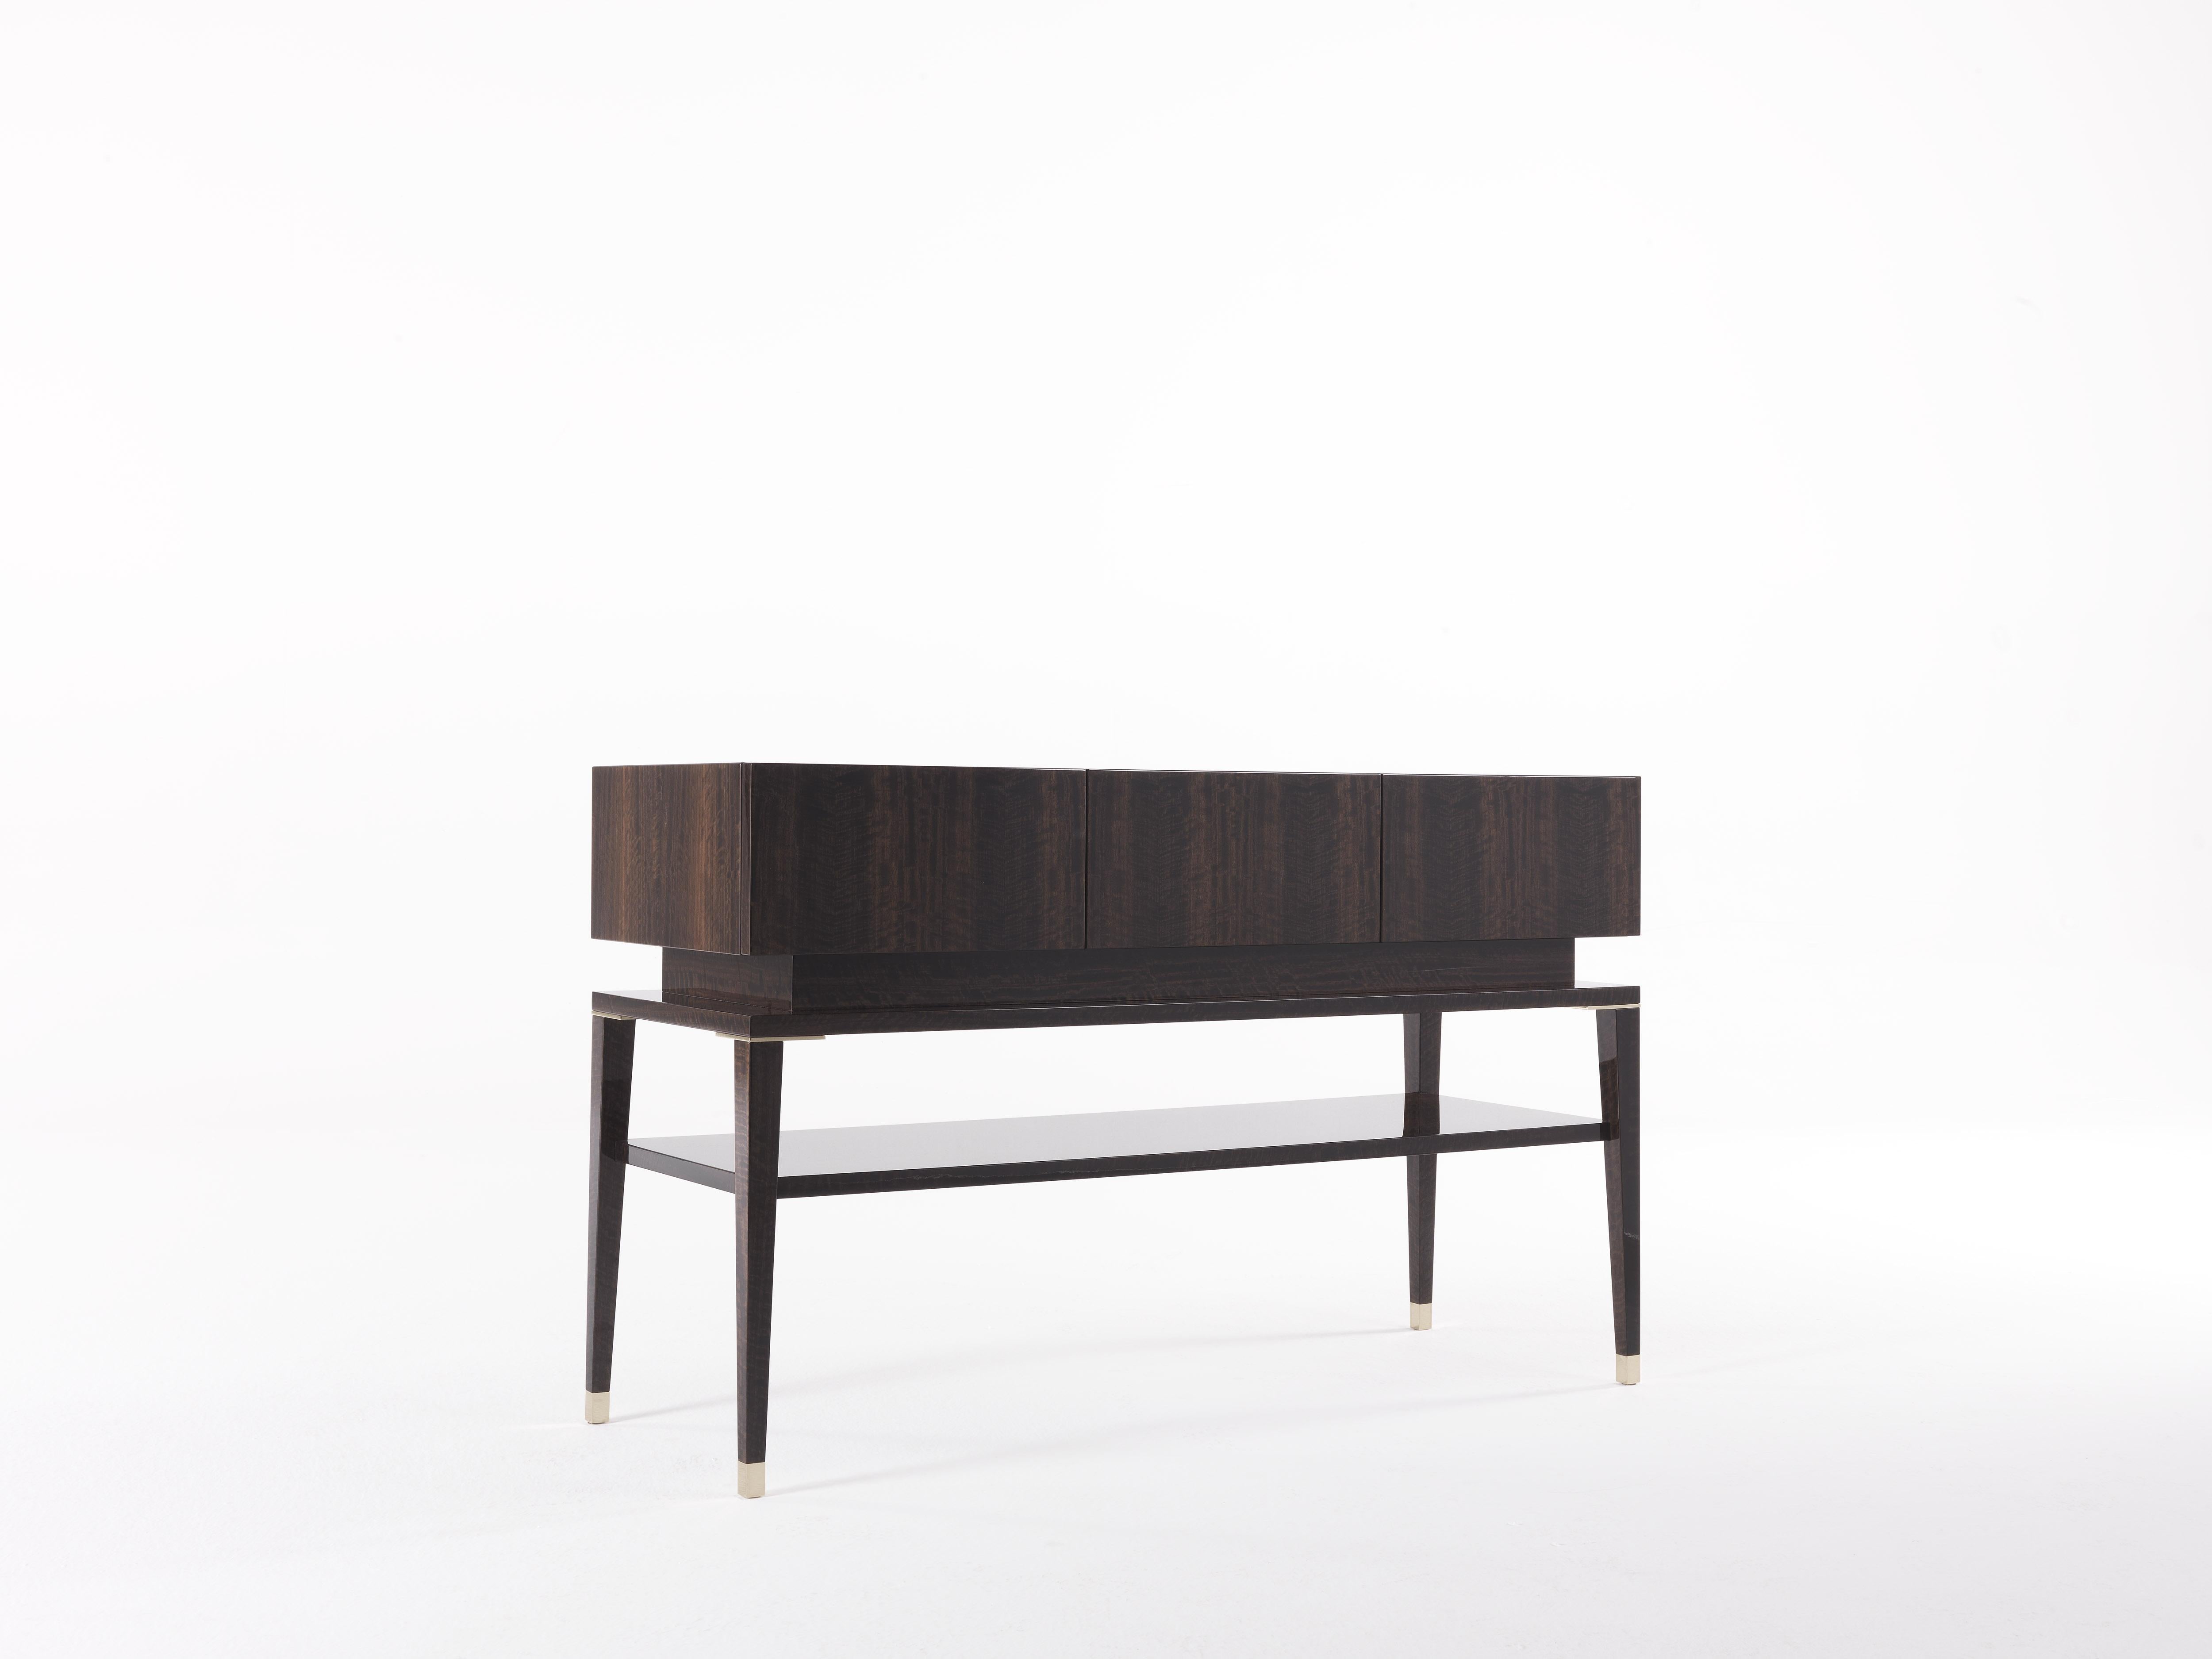 A shapely and geometric piece of furniture in which the rigorous lines of the structure in glossy smoked eucalyptus frisé wood are enhanced by the details in polished brass to create a piece of furniture that merges function and aesthetic.

Console.